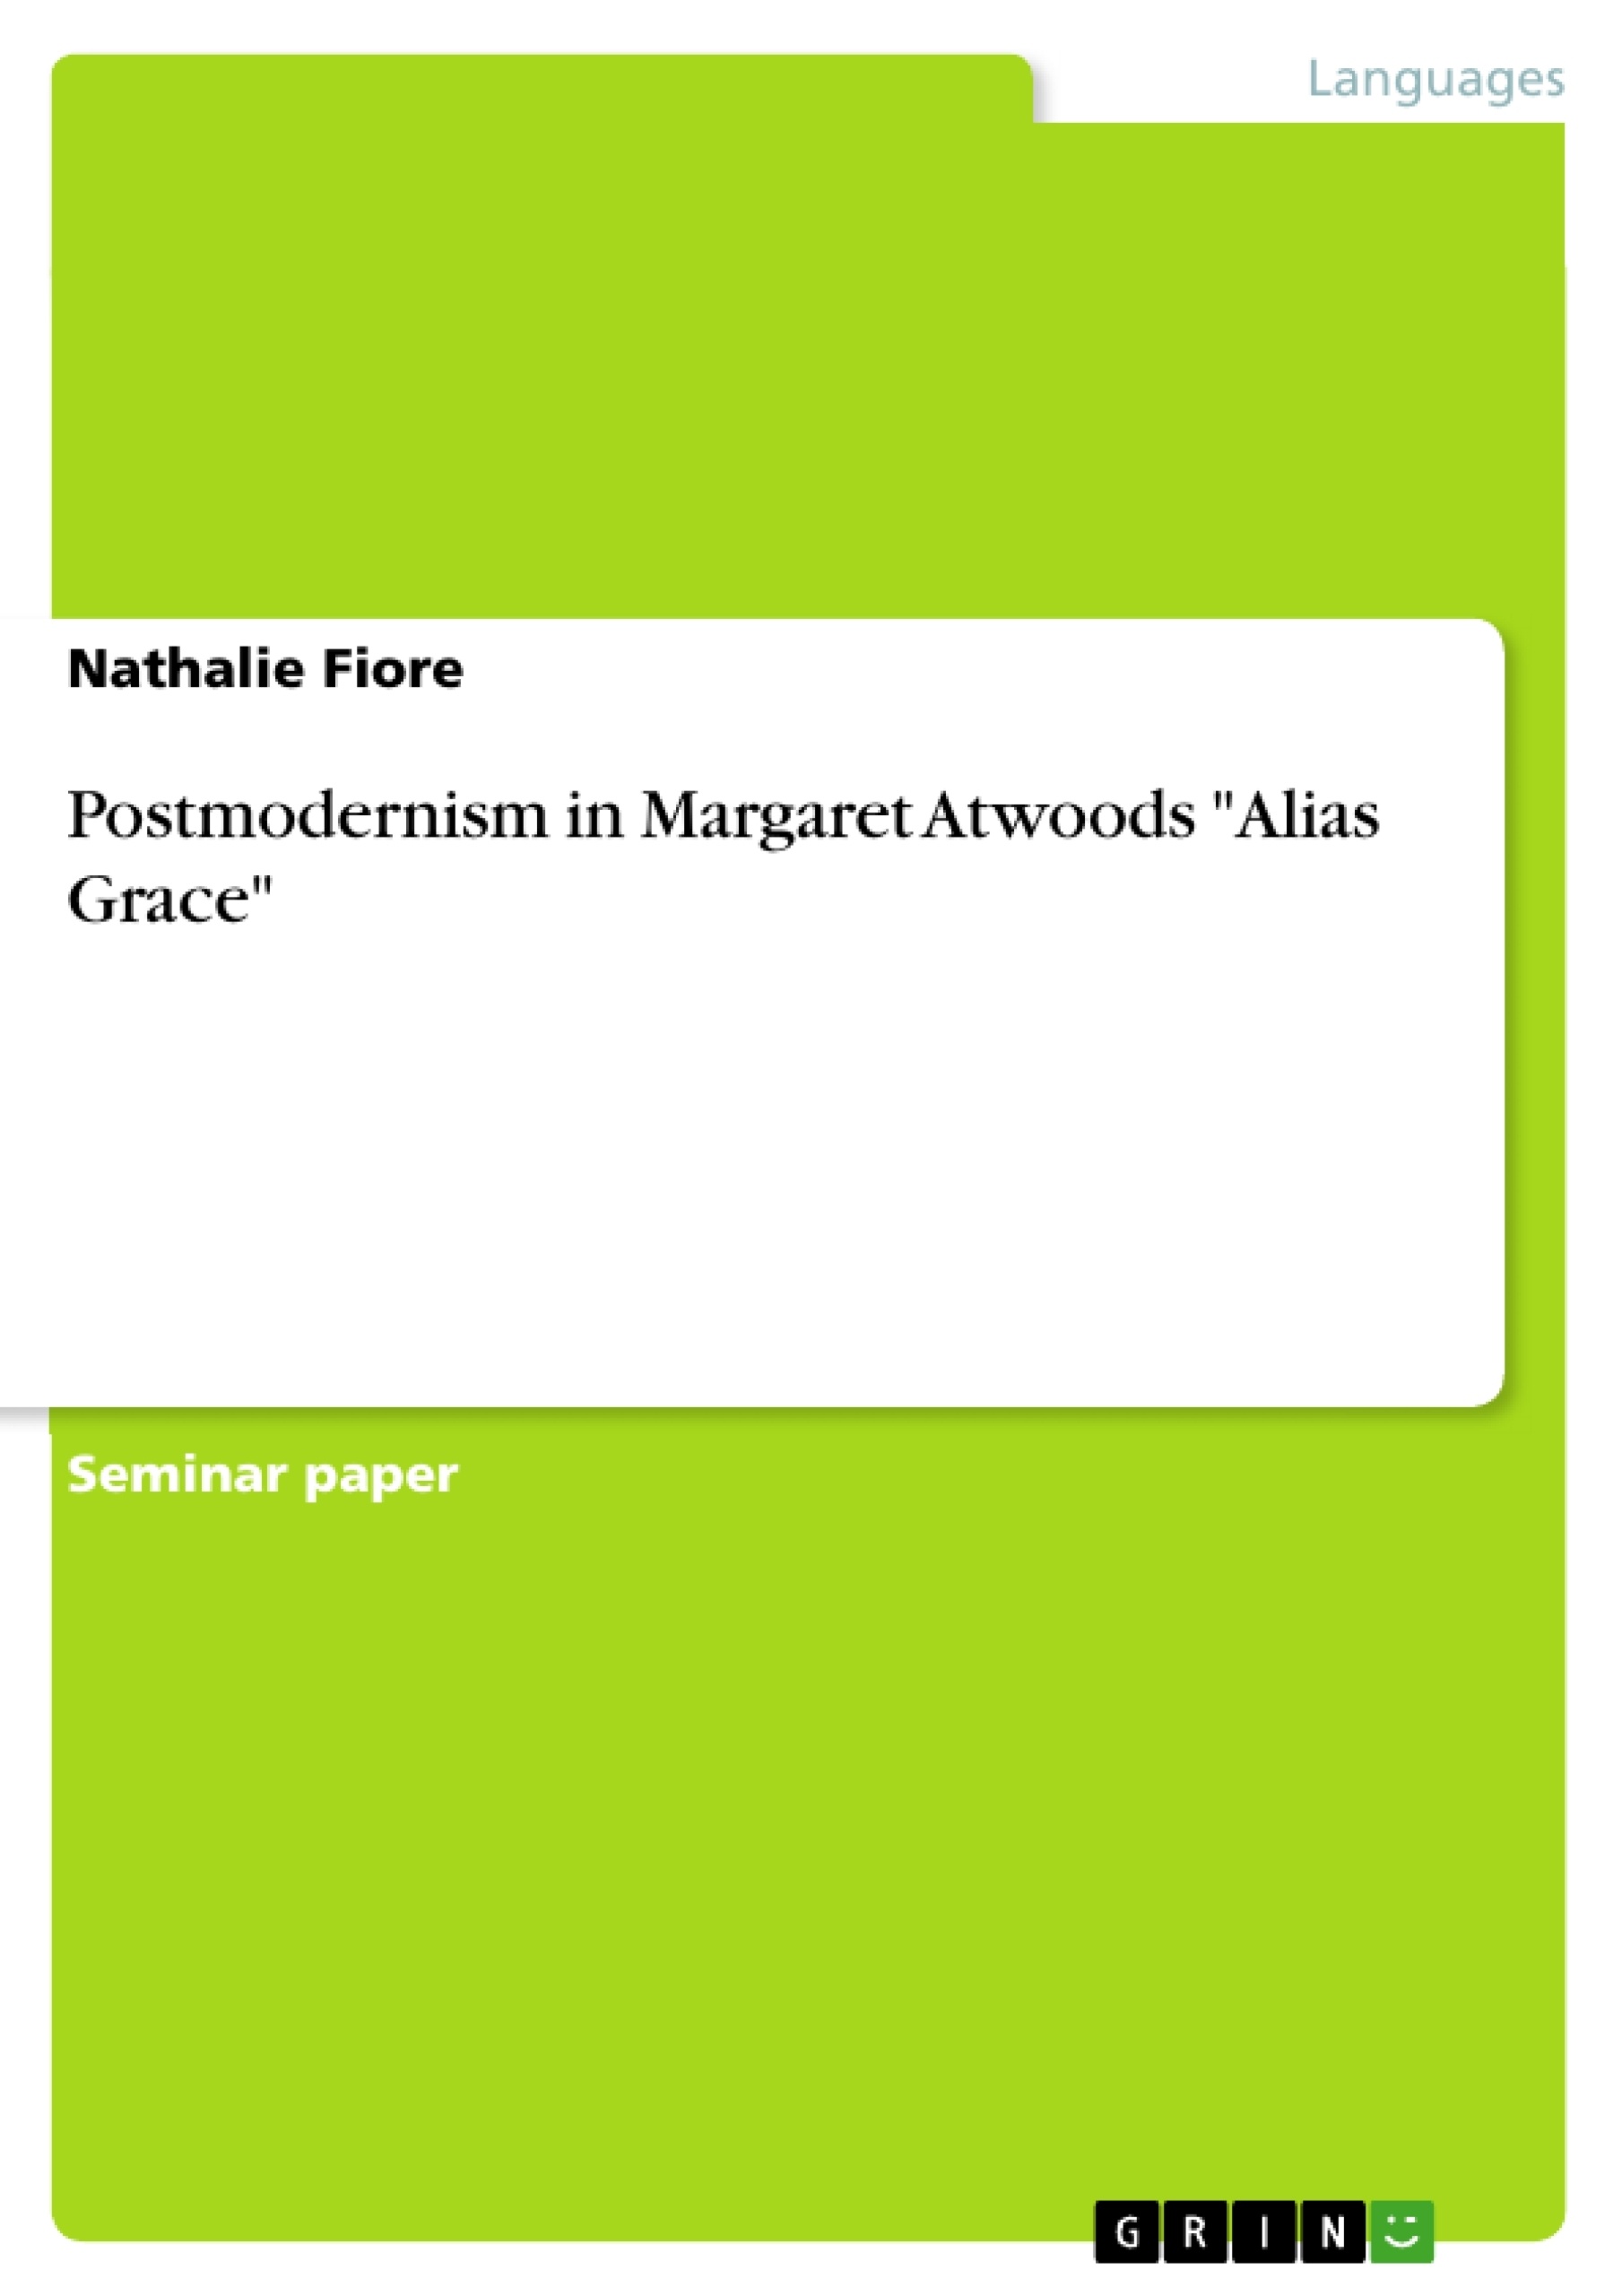 Title: Postmodernism in Margaret Atwoods "Alias Grace"